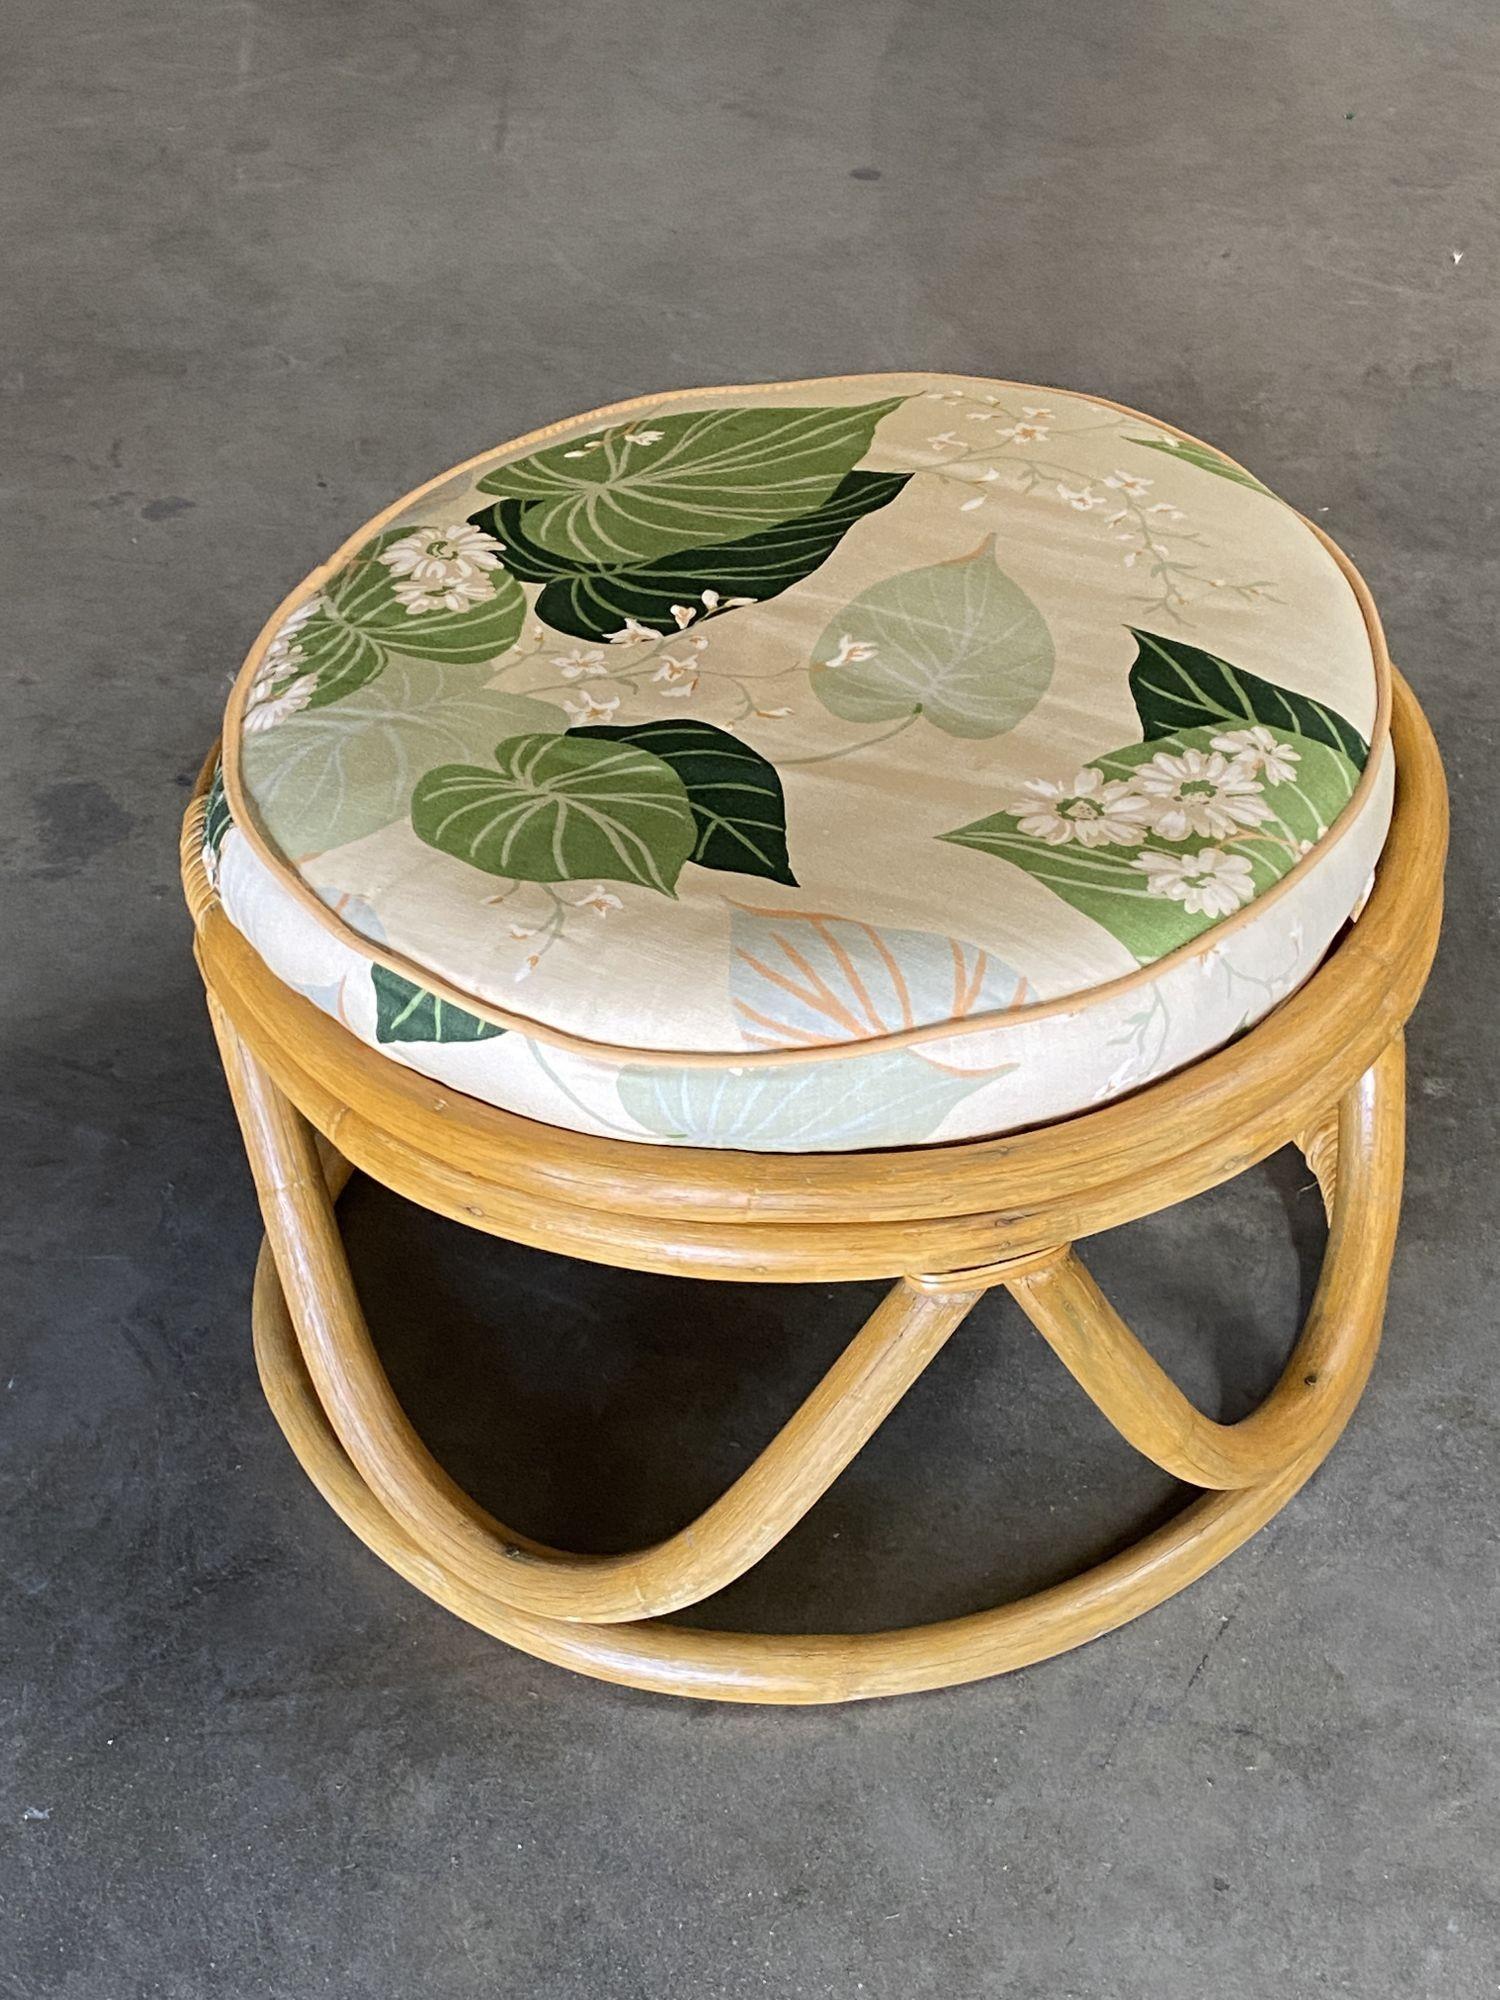 Fully restored round stacked rattan ottoman stool recovered in headstock original 1940s barkcloth fabric. Available- 2 We only purchase and sell only the best and finest rattan furniture made by the best and most well-known American designers and